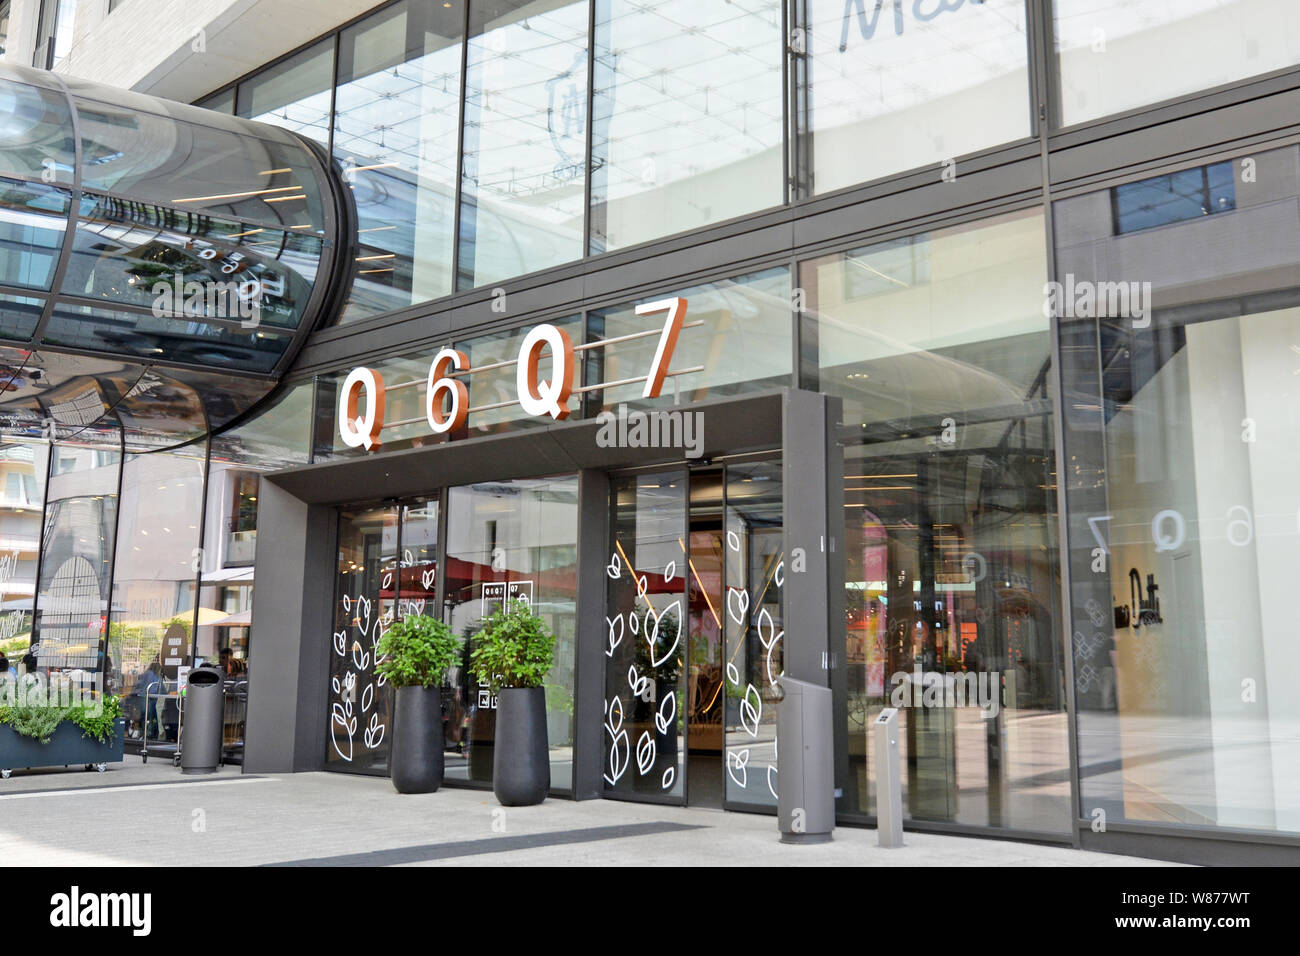 Mannheim, Germany - July 2019: Entrance of  of big modern shopping center called 'Q6 Q7' in Mannheim city Stock Photo